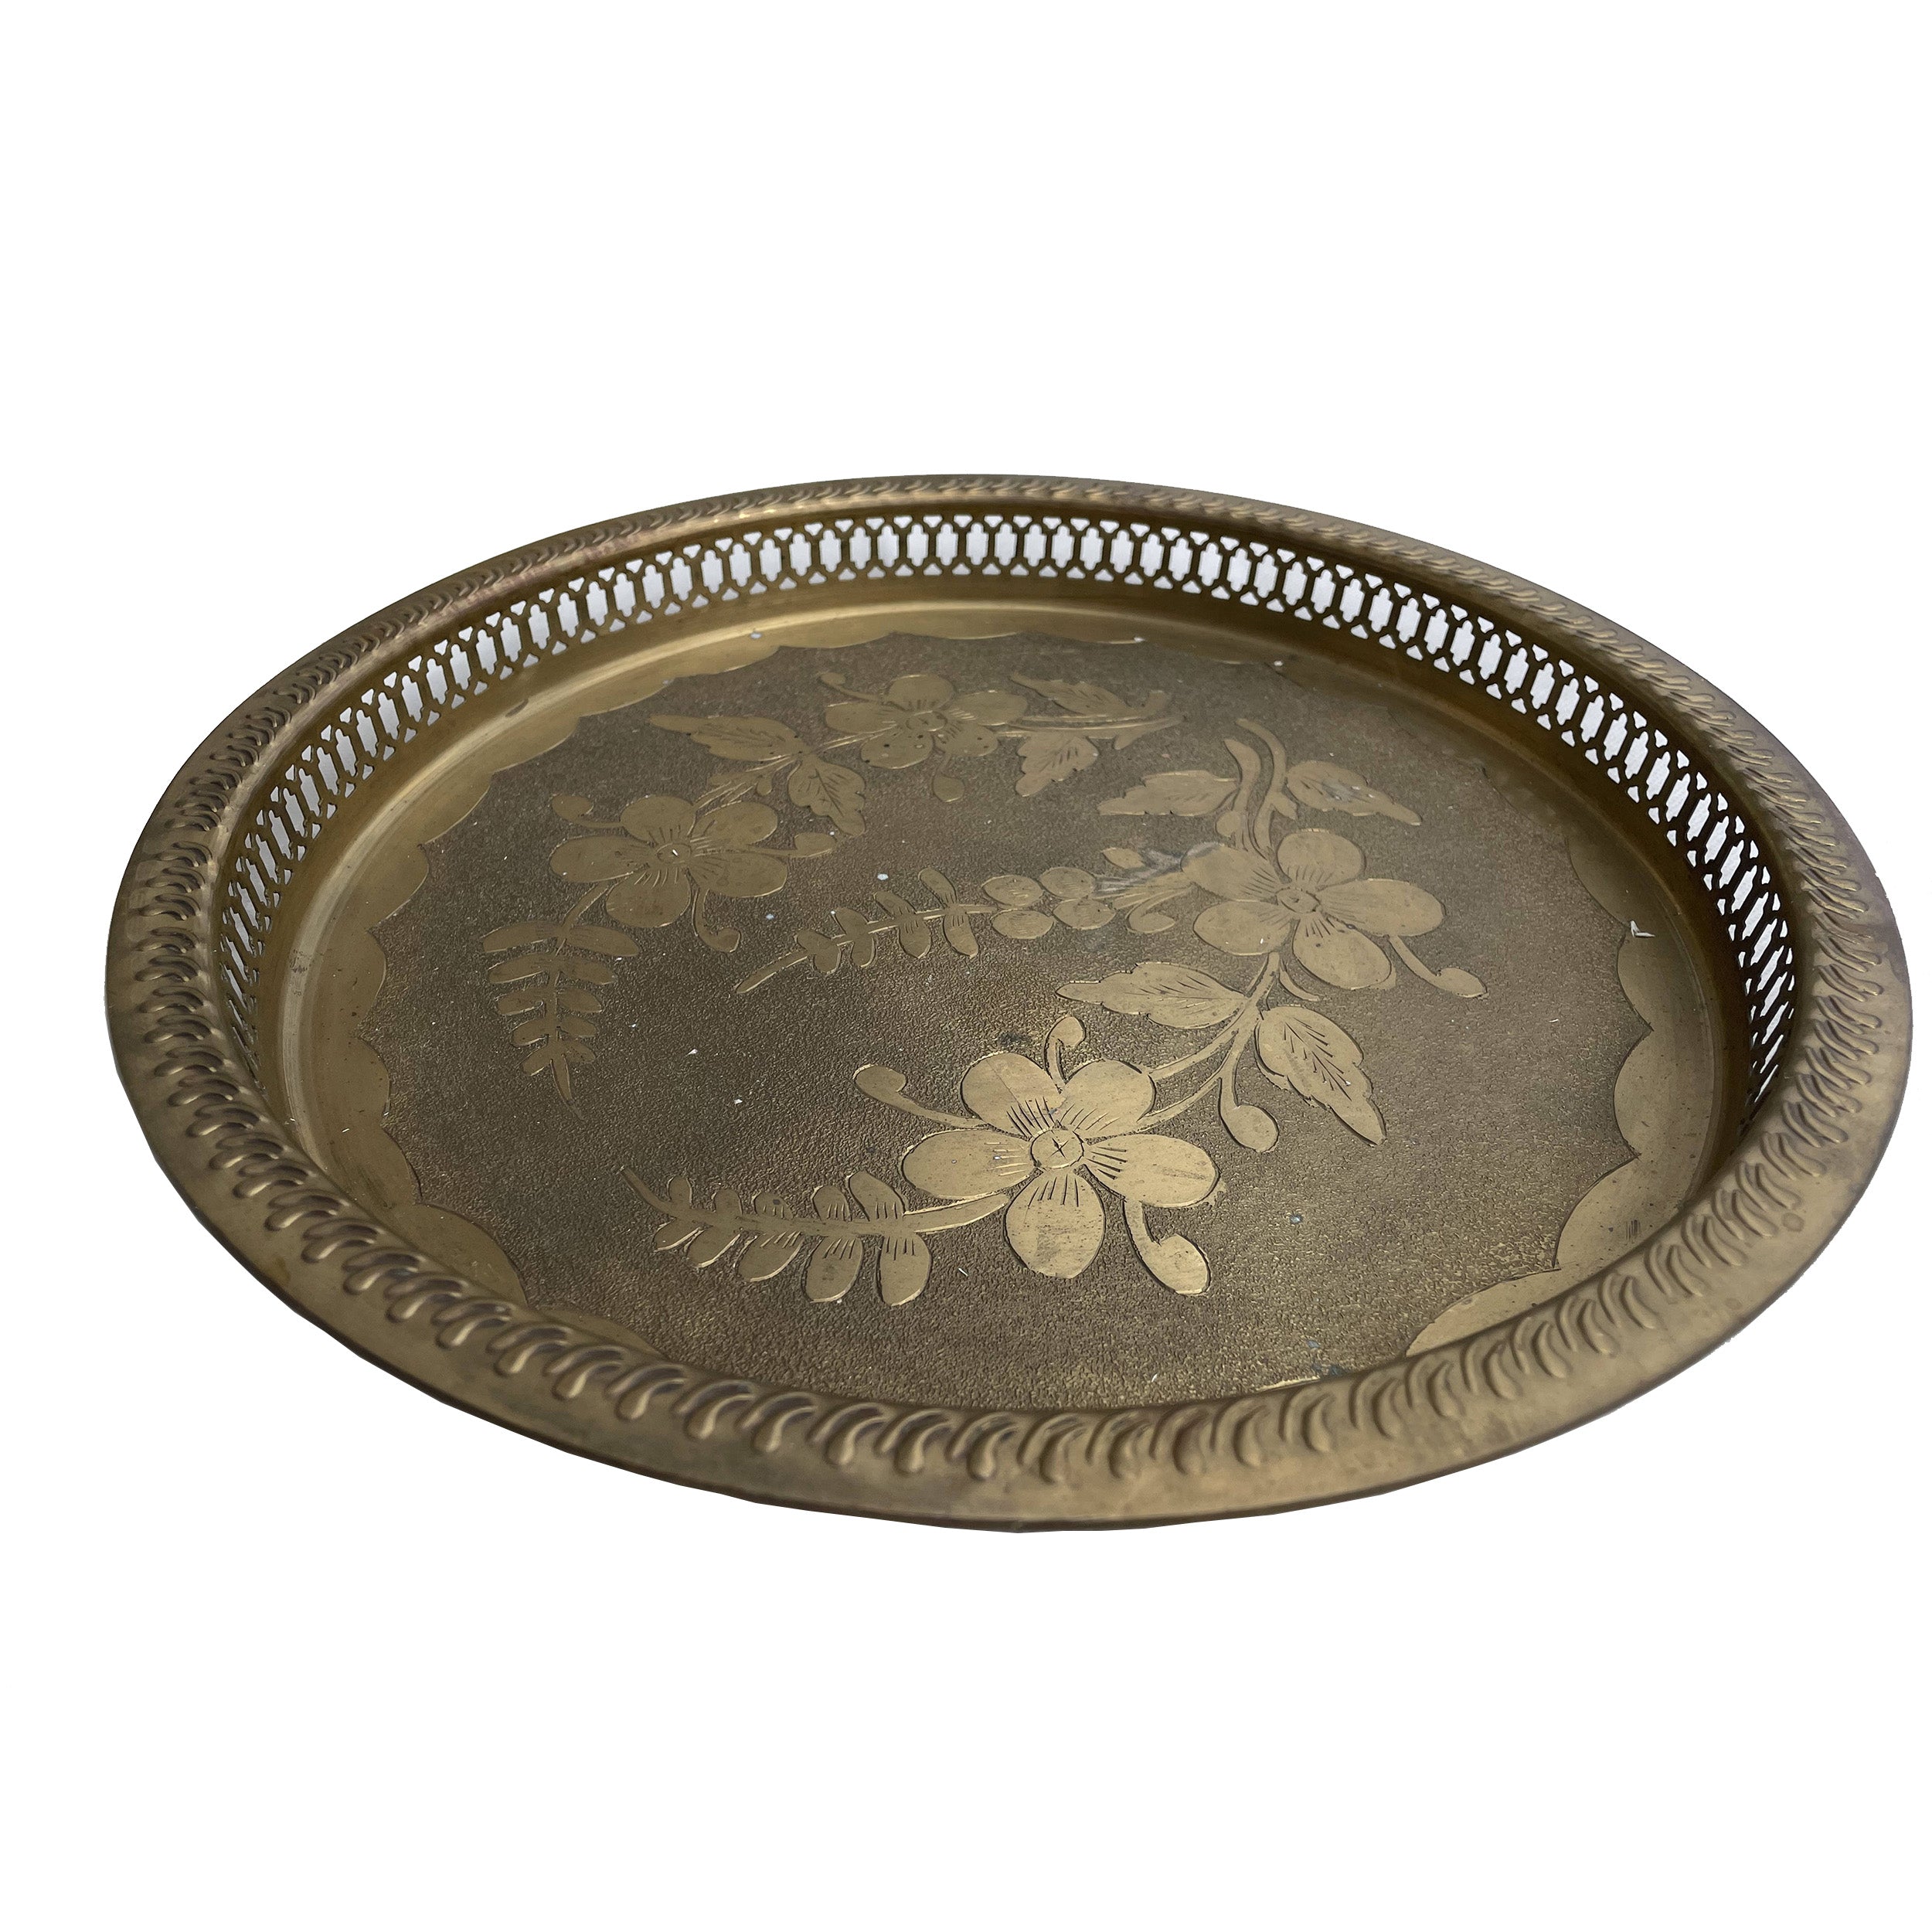 1980s Brass Etched Serving Tray by Rosemar